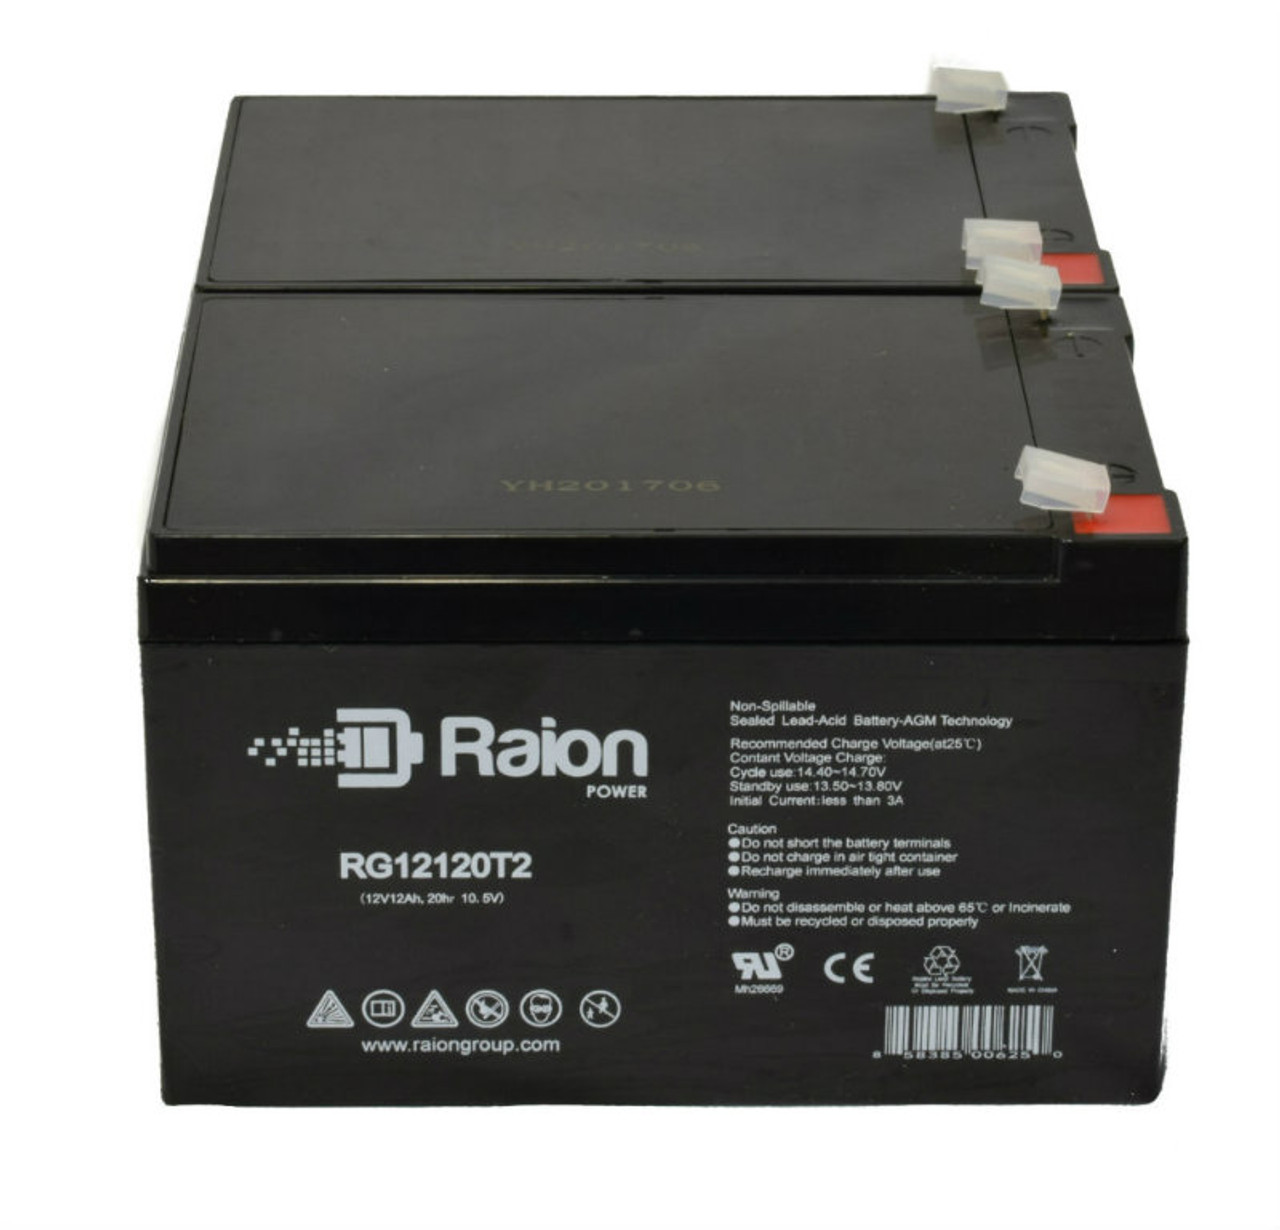 Raion Power 12V 12Ah Replacement Alarm Security System Battery for Altronix SMP10C24X - 2 Pack